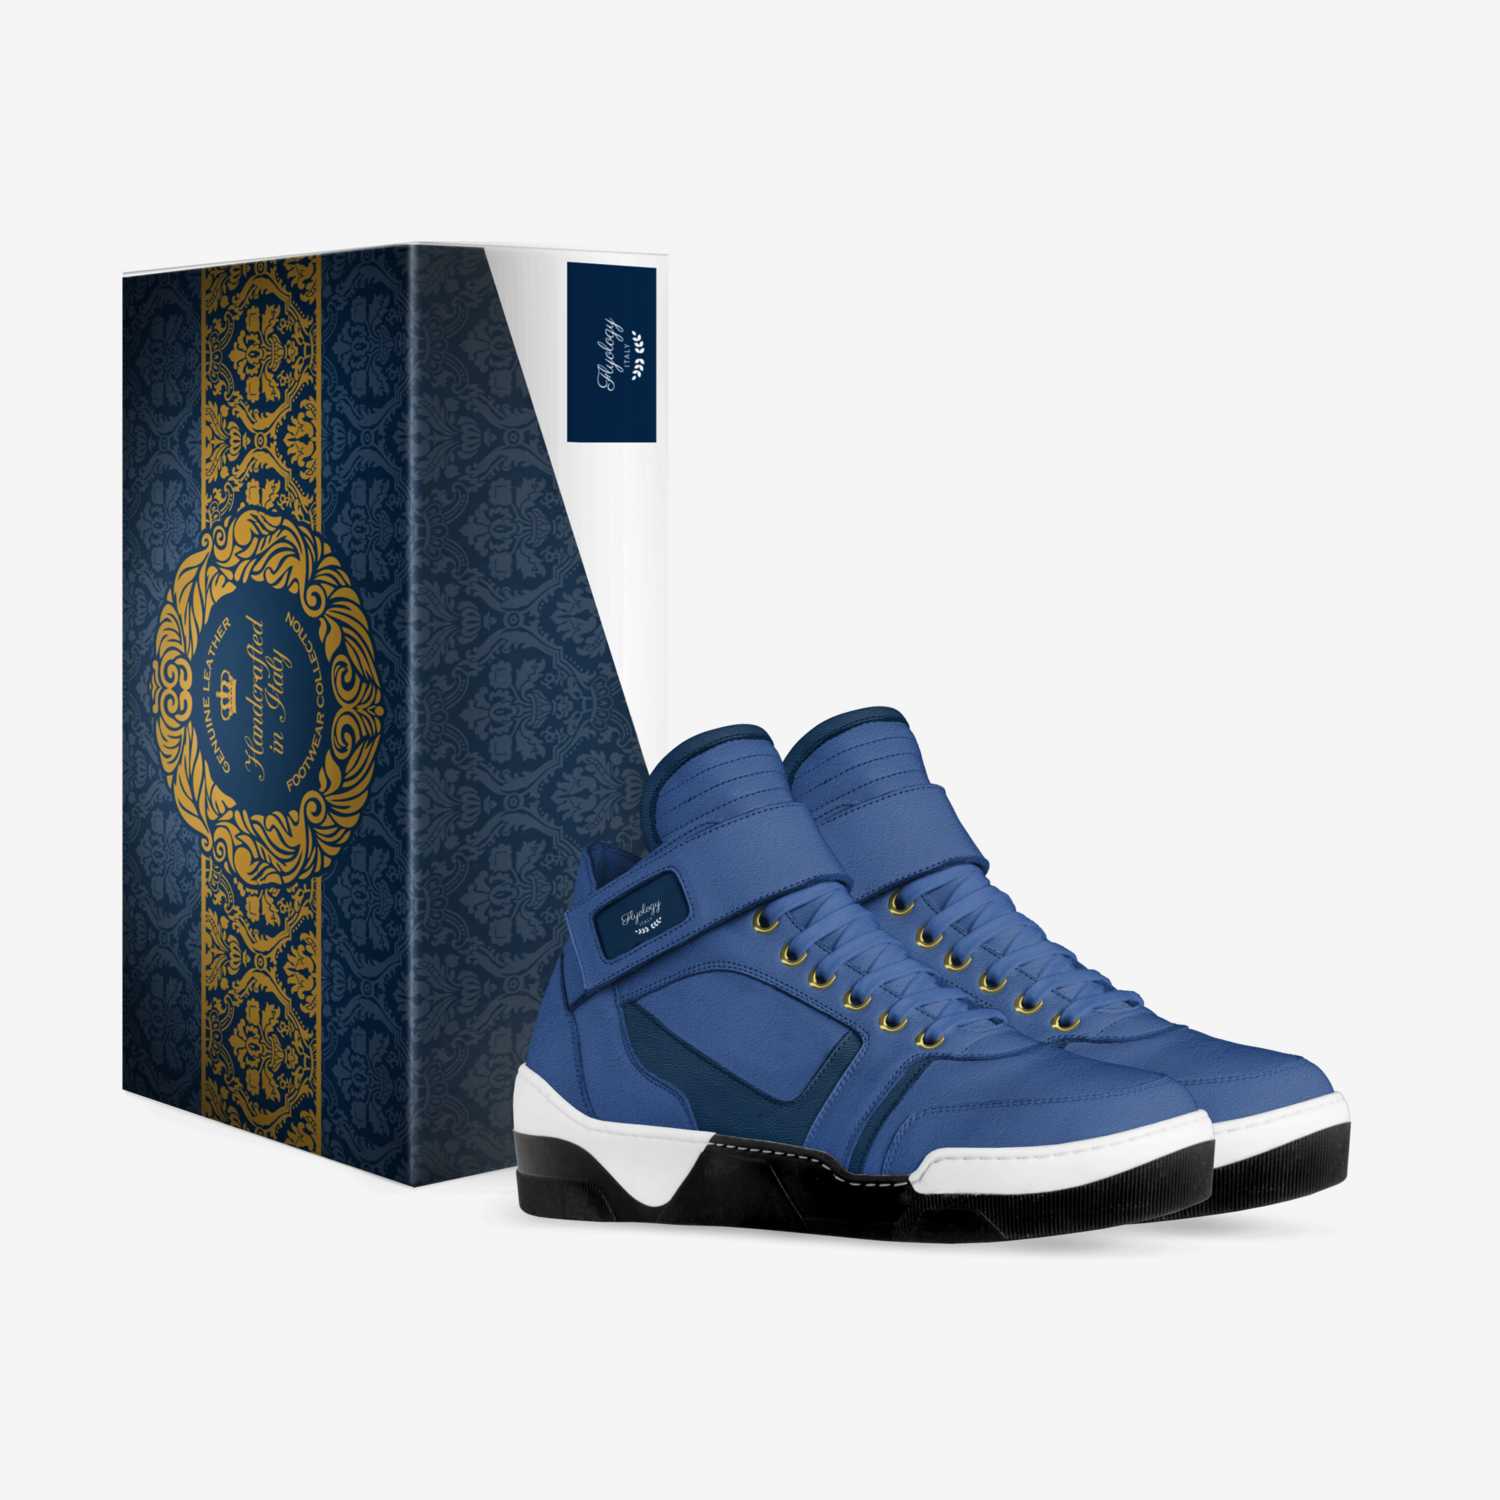 Flyology custom made in Italy shoes by Flyology Italy | Box view